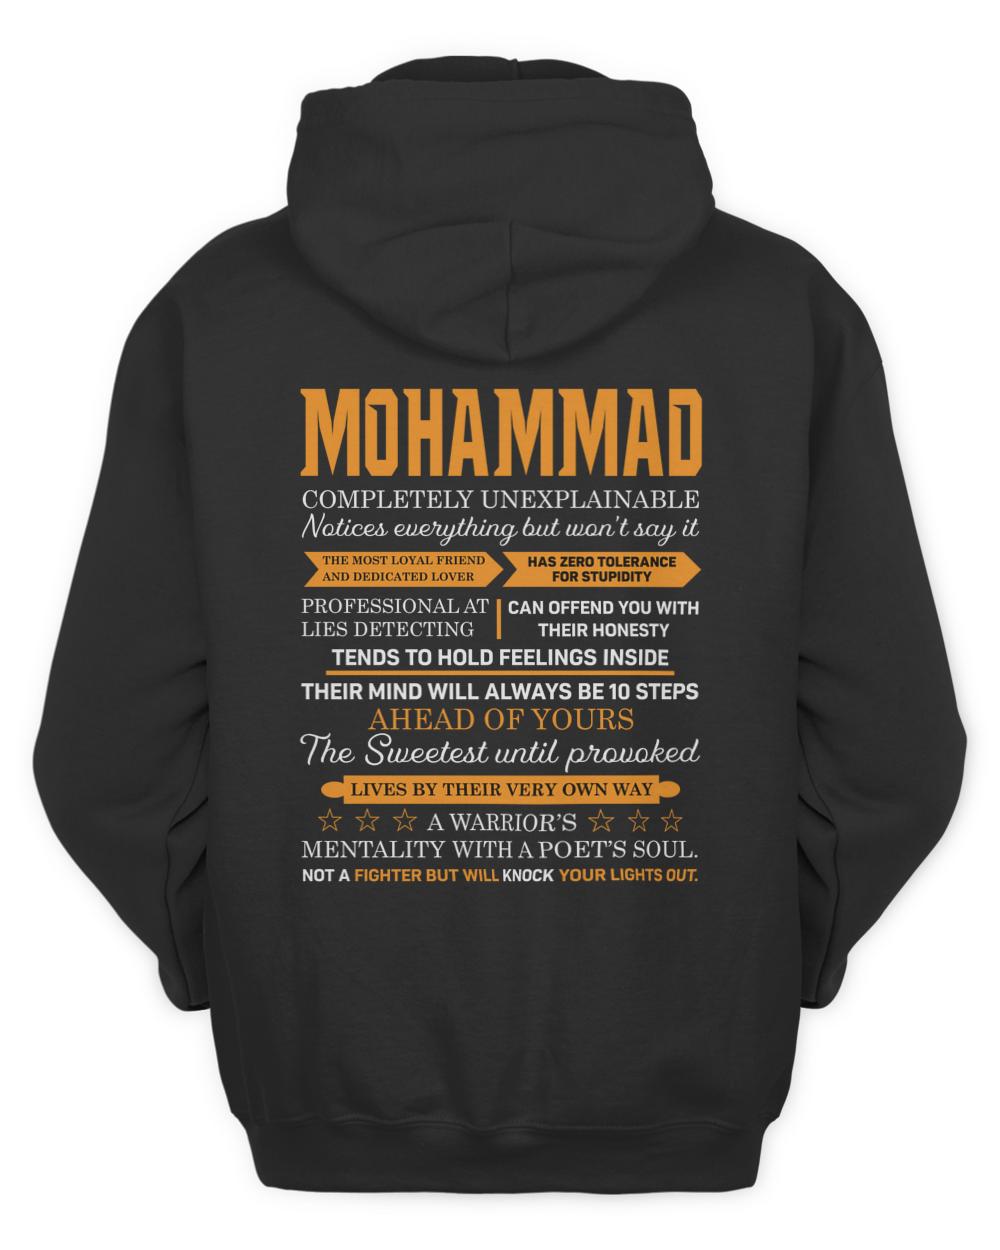 MOHAMMAD-H2-N1